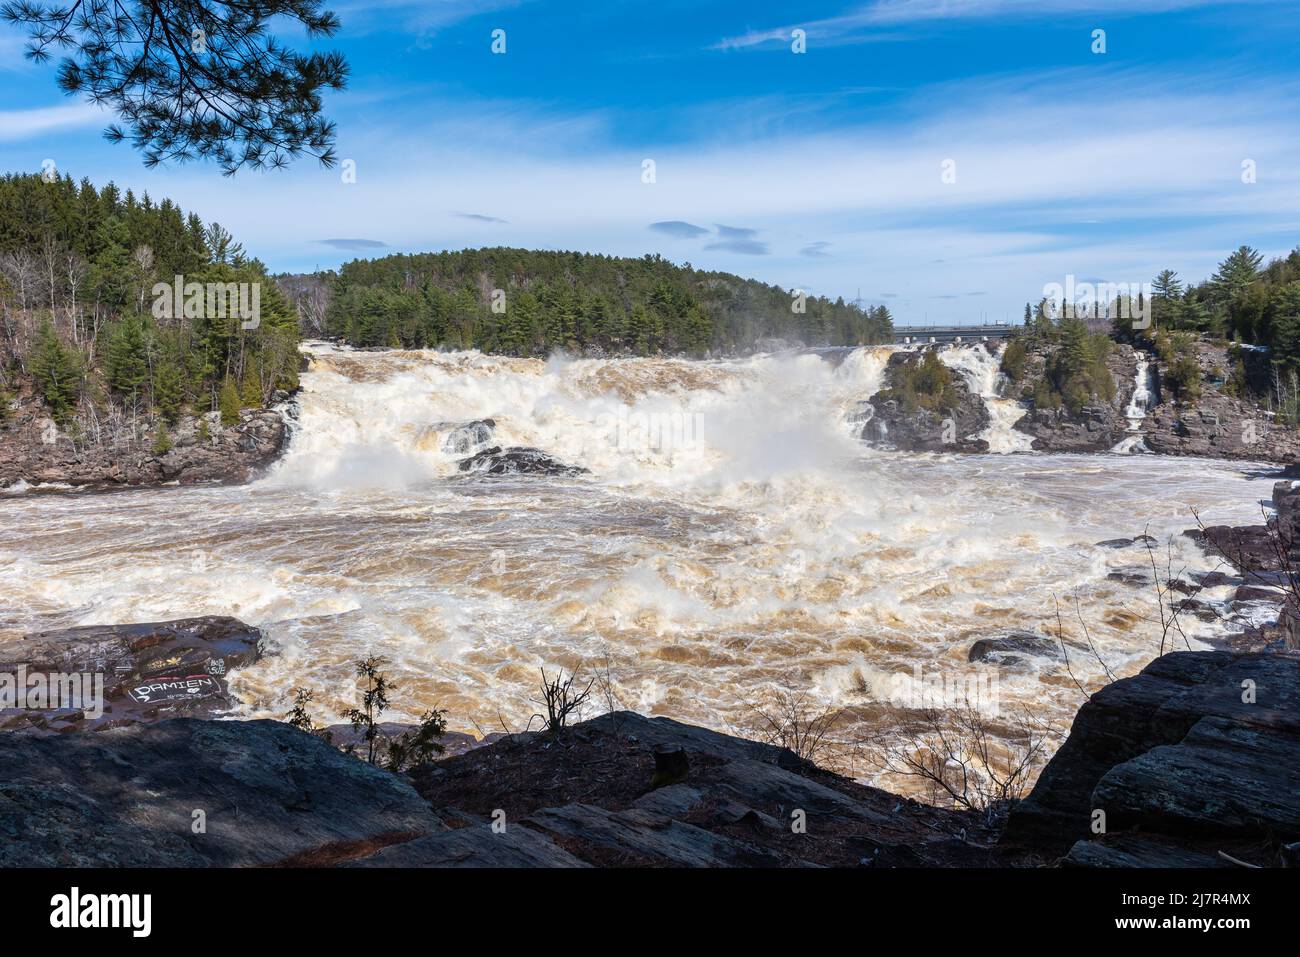 The St Maurice river at the Shawinigan devil’s hole during the spring floods, Quebec, Canada Stock Photo